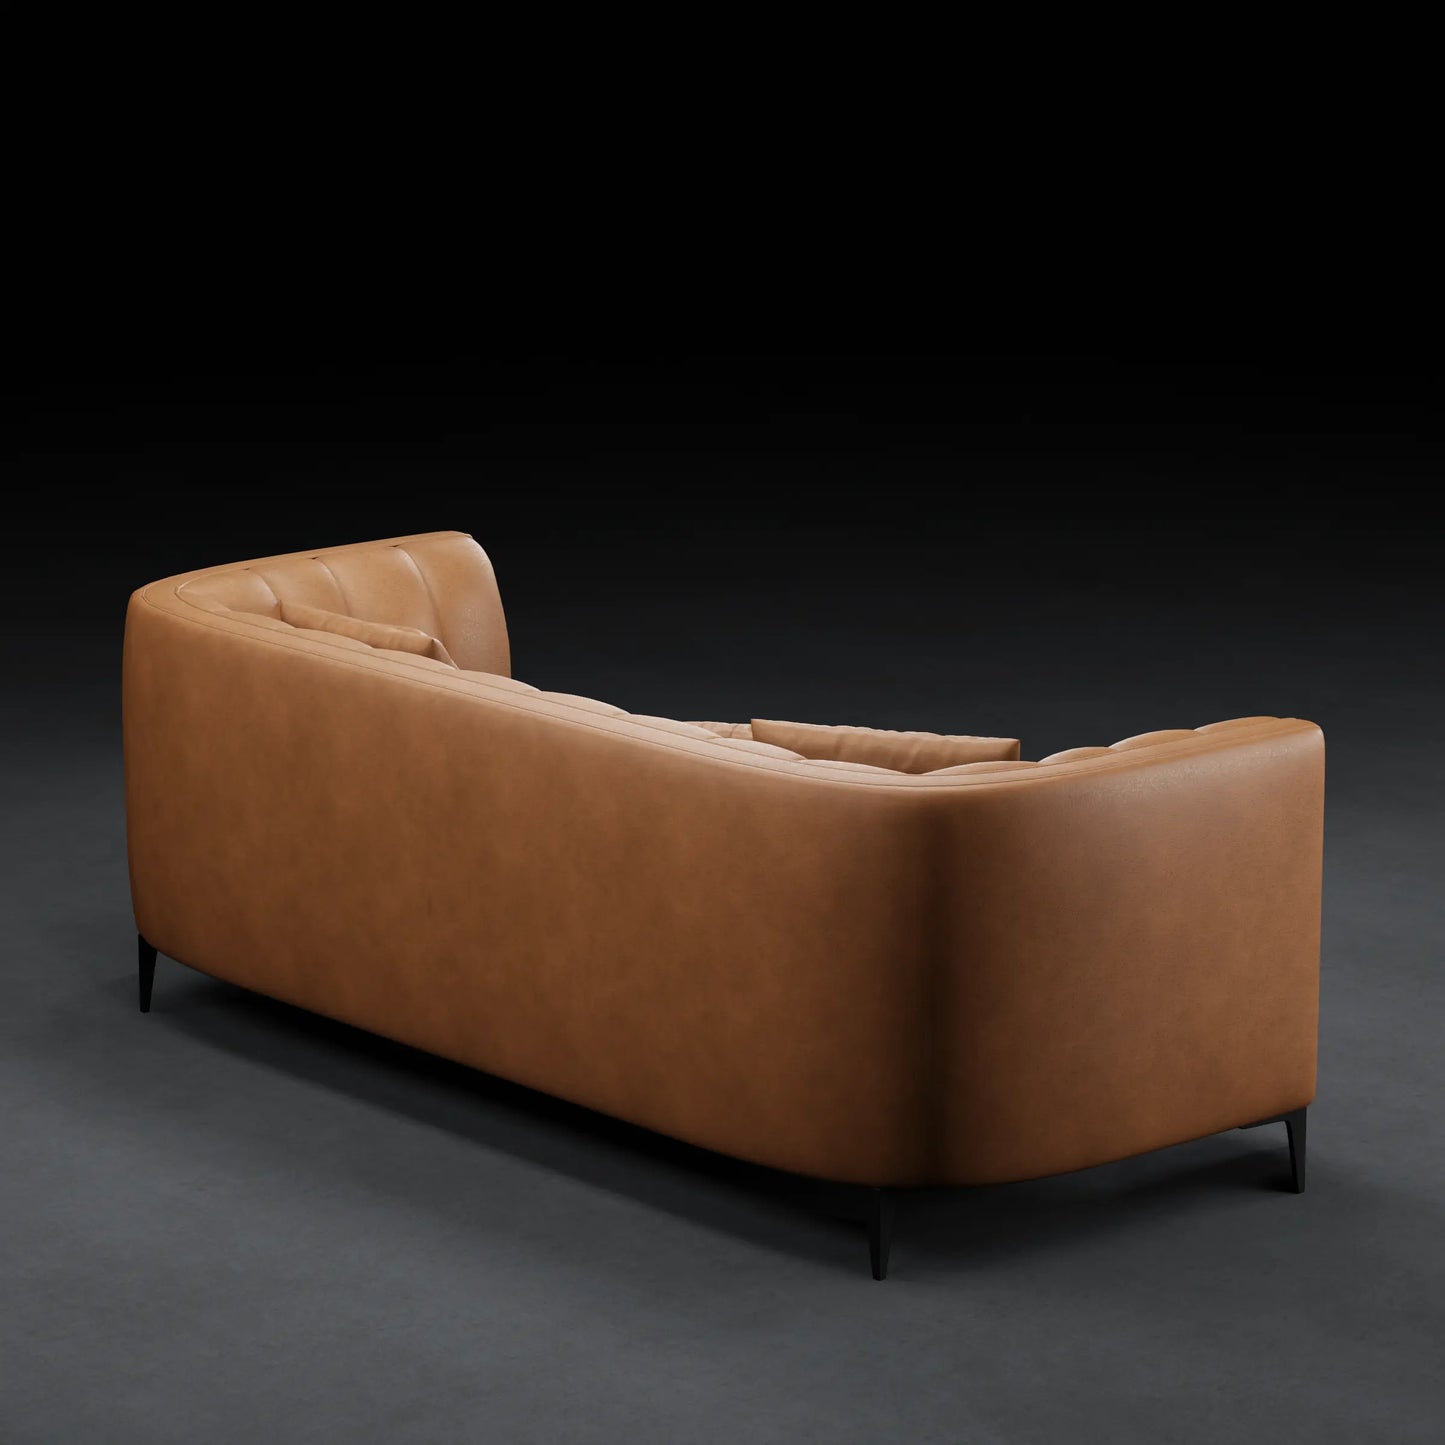 JASMINE - 2 Seater XL Couch in Leather Finish | Tan Color